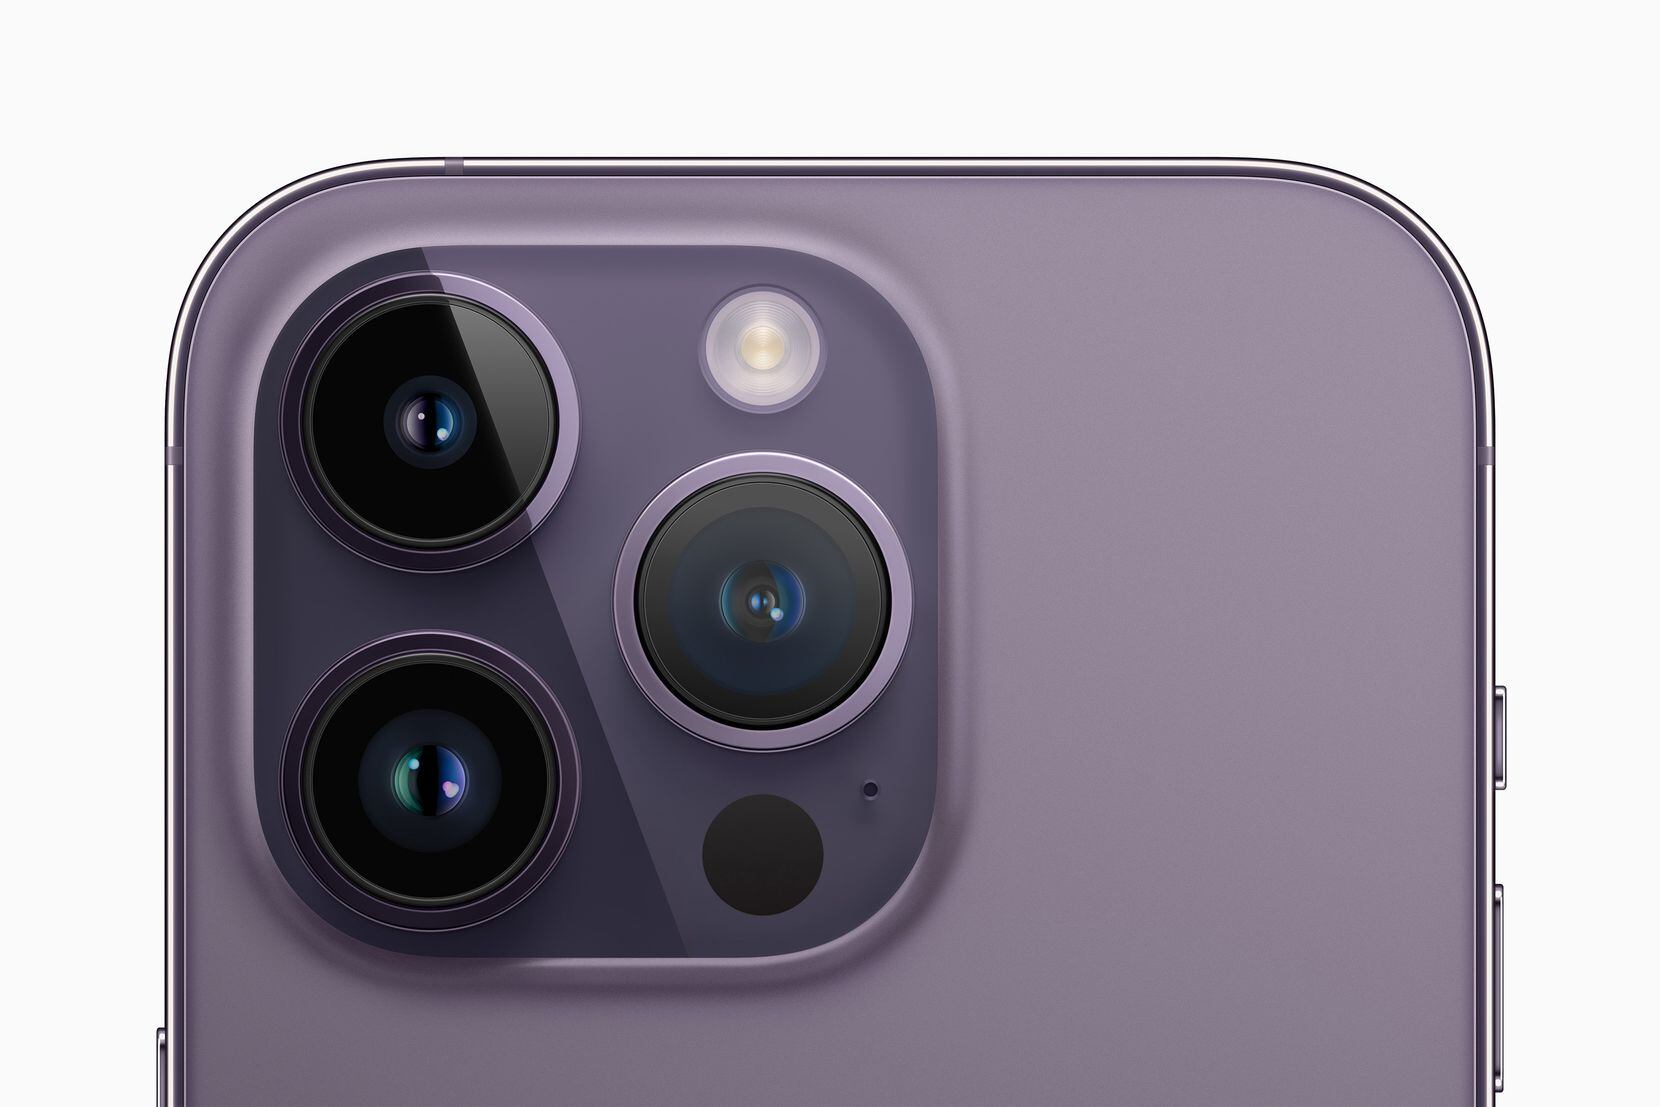 The main camera of the Apple iPhone 14 Pro has a 24mm wide-angle lens.